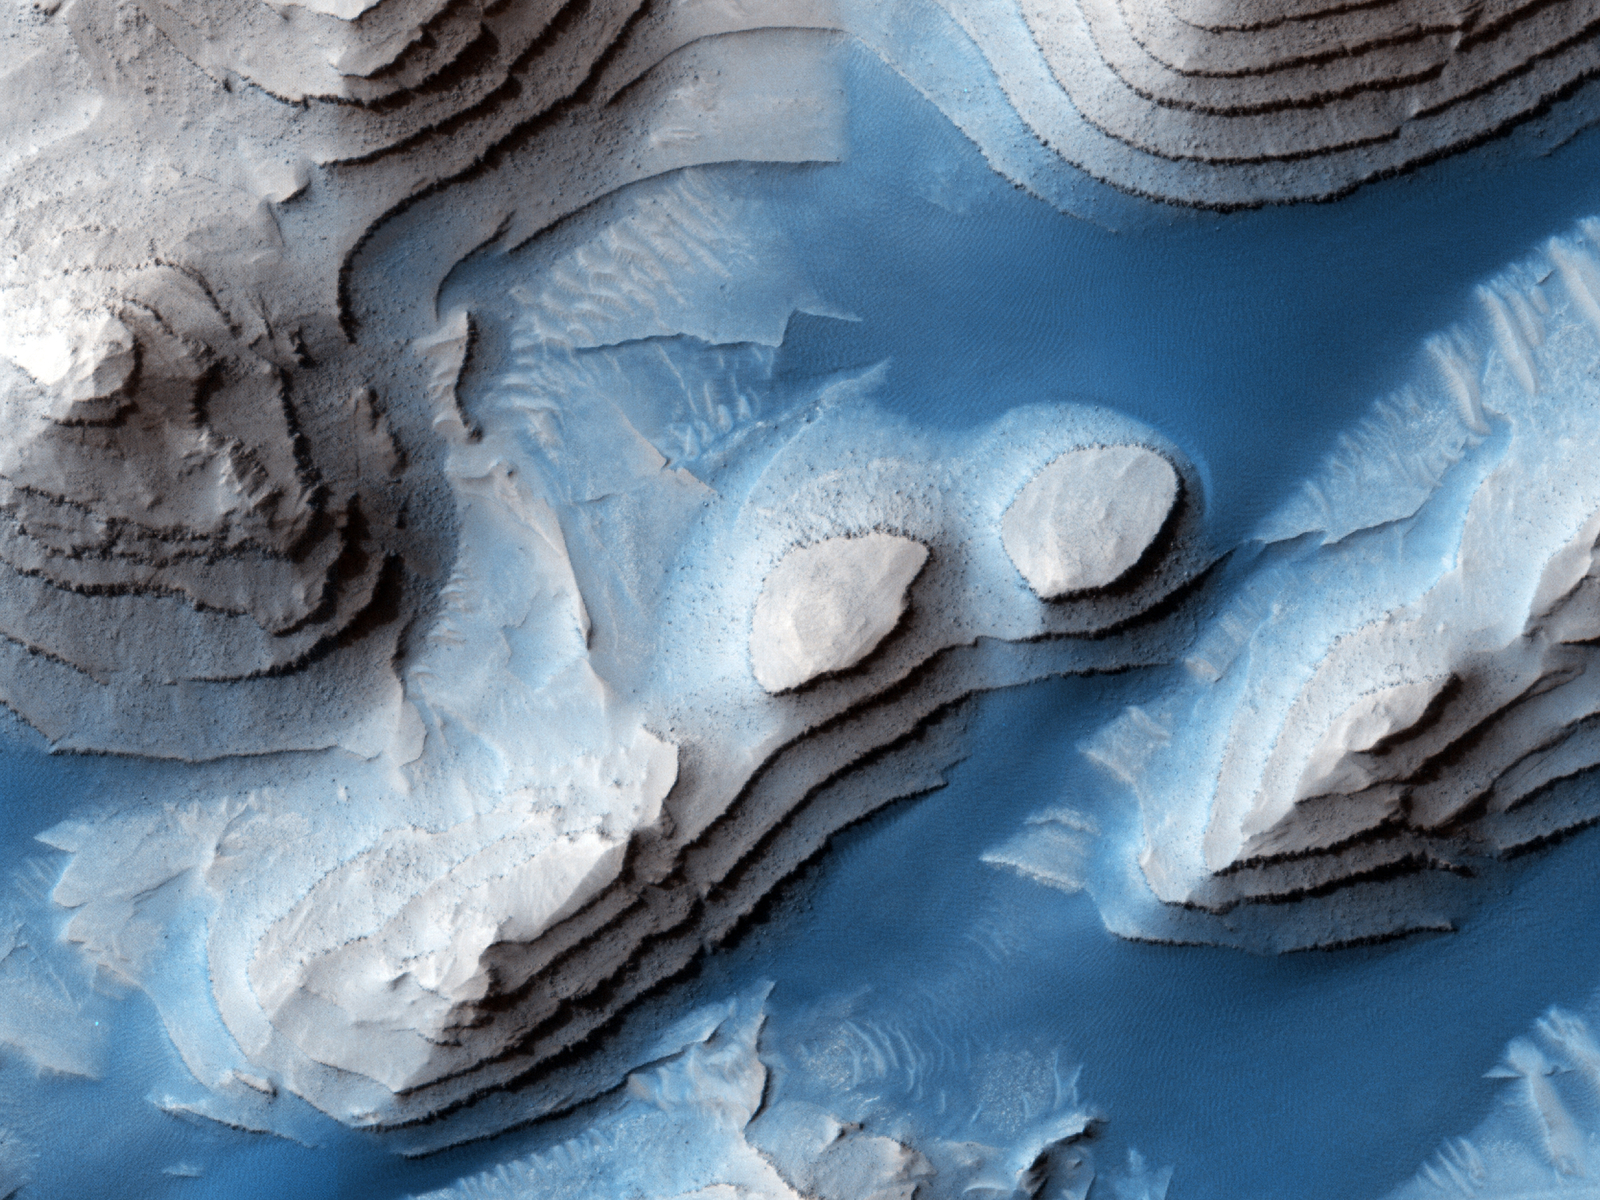 topographical image of the surface of mars. shows layers of land embedded in ice.